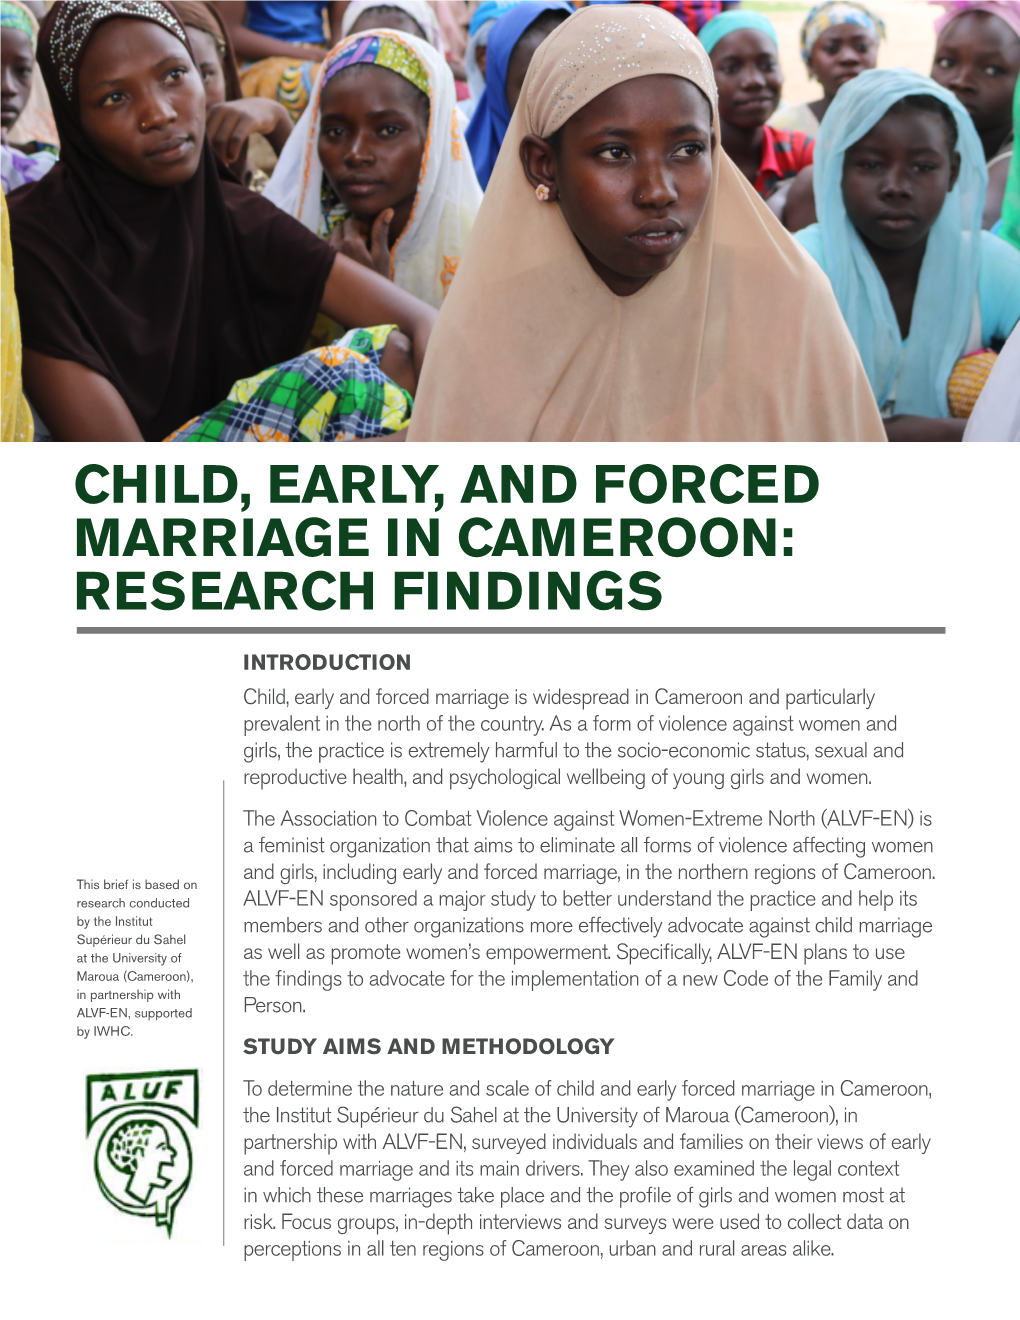 Child, Early, and Forced Marriage in Cameroon: Research Findings